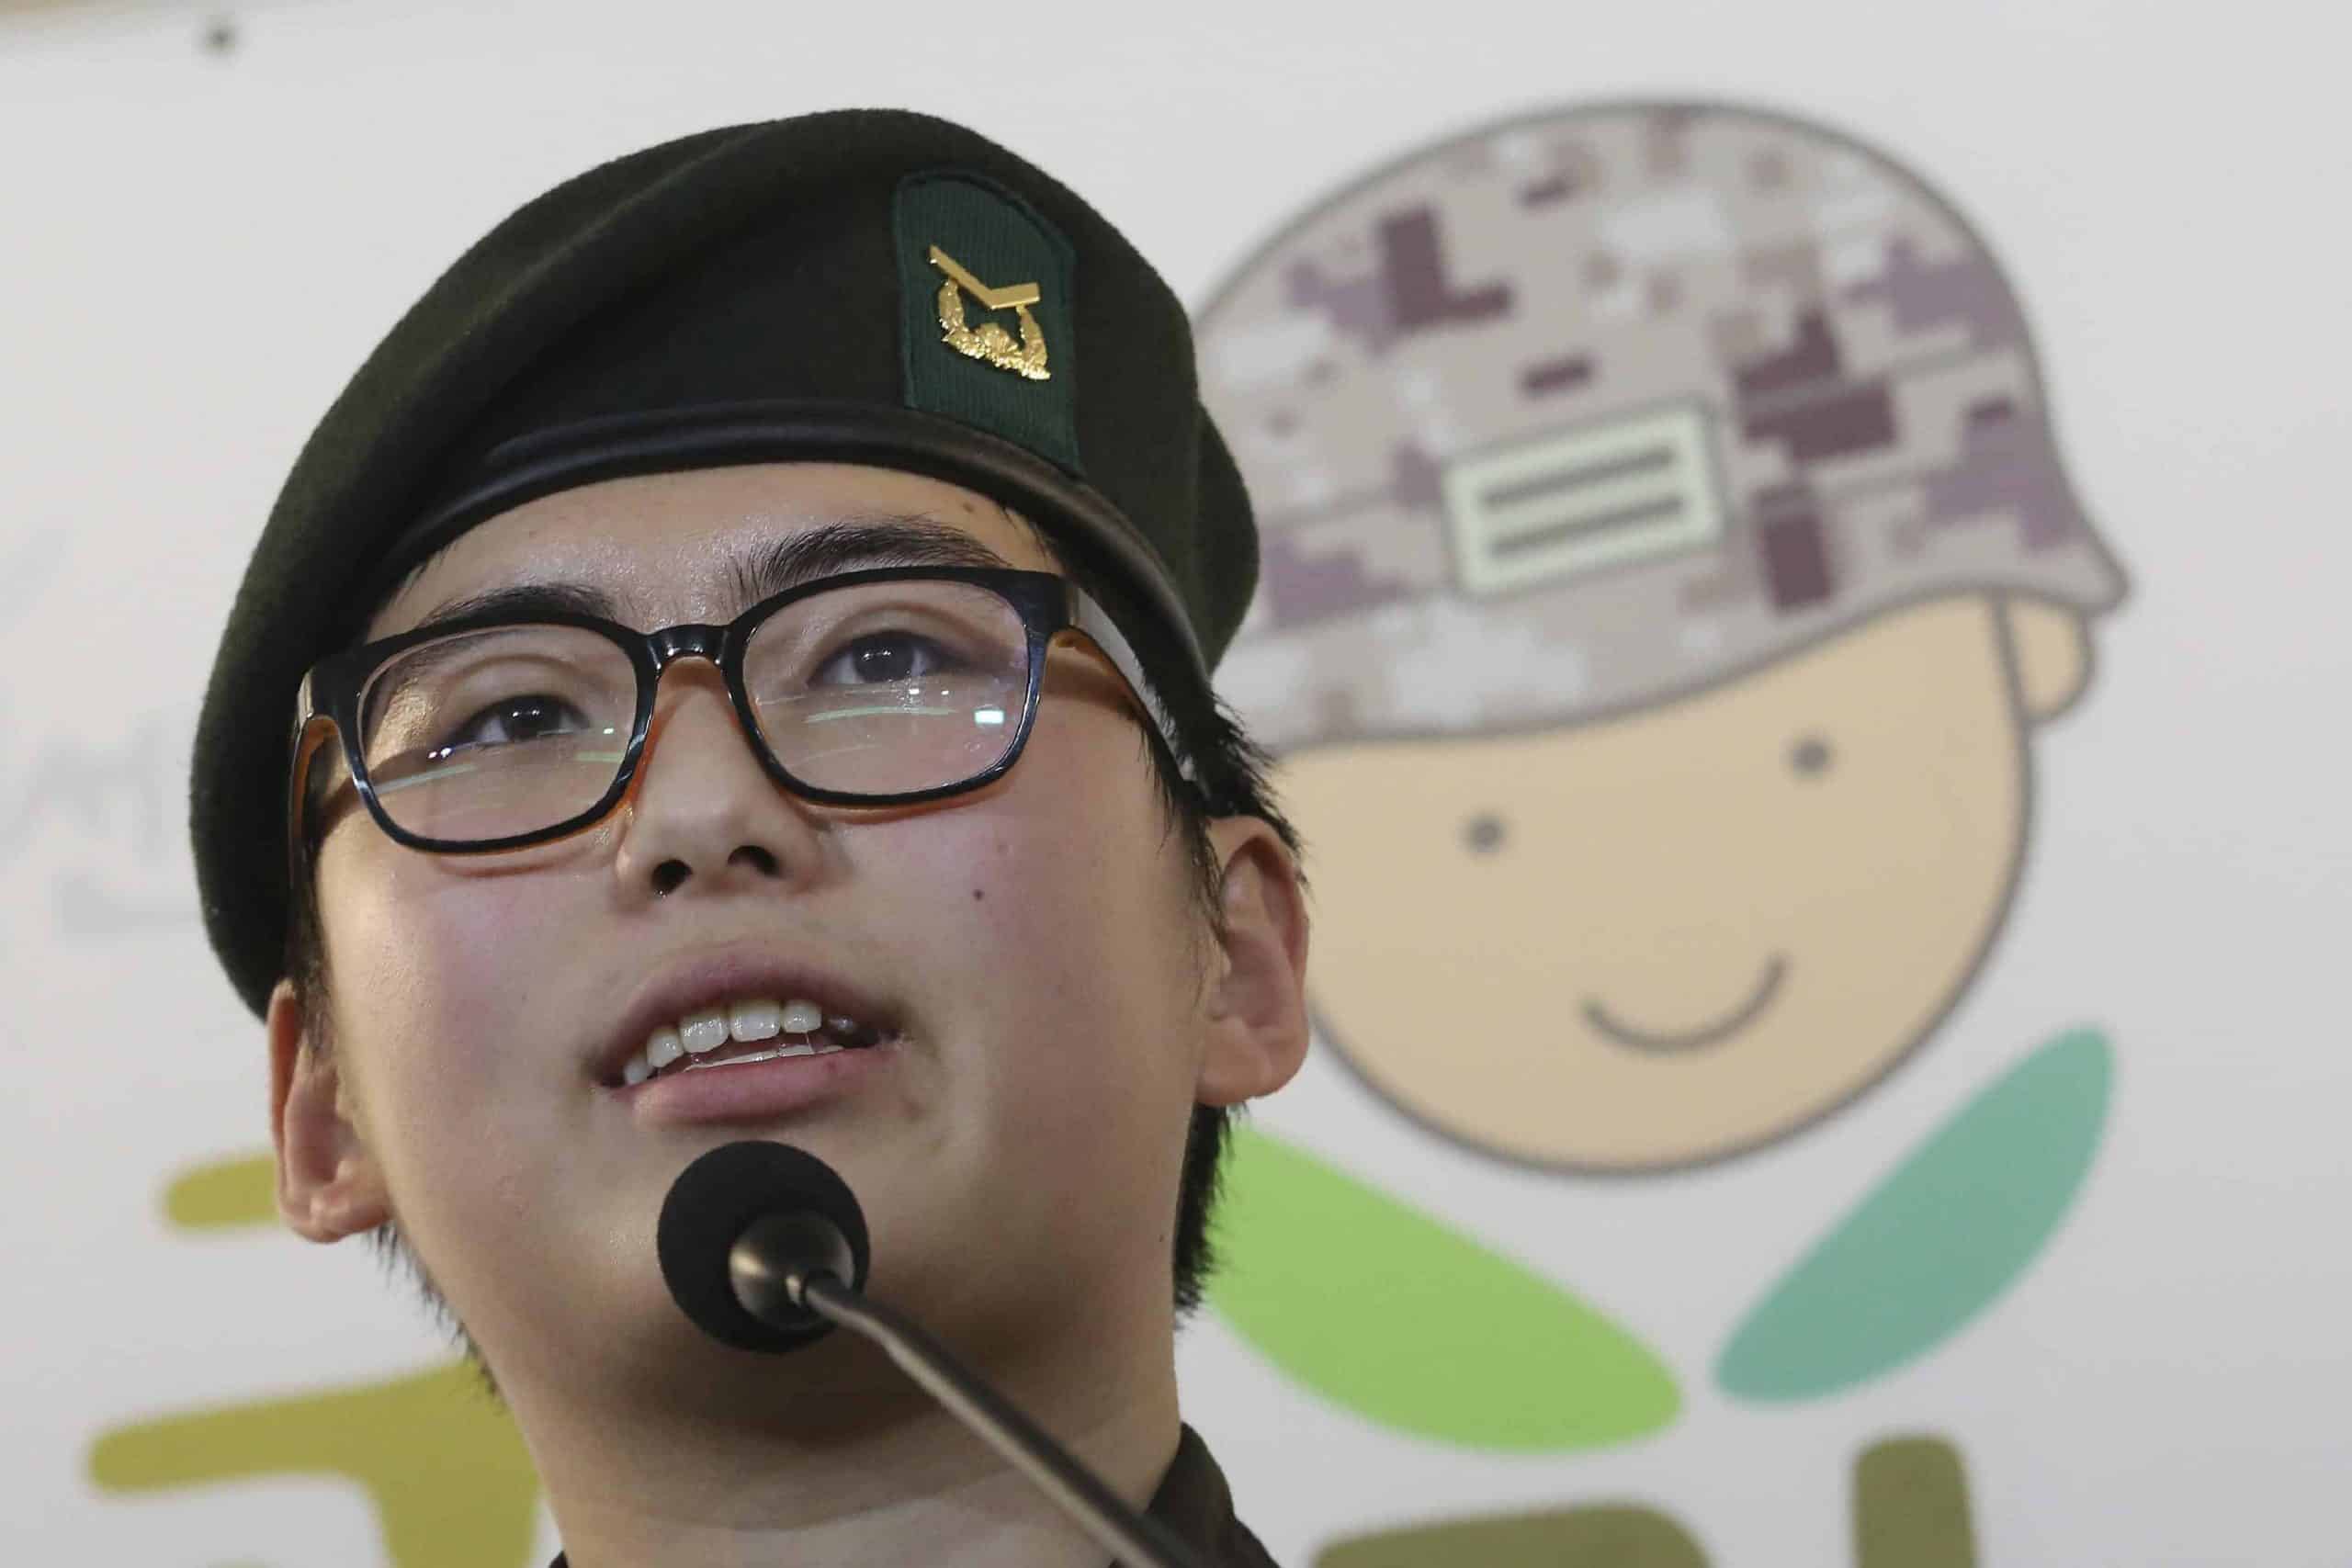 South Korea’s transgender soldier urges military to let her continue service